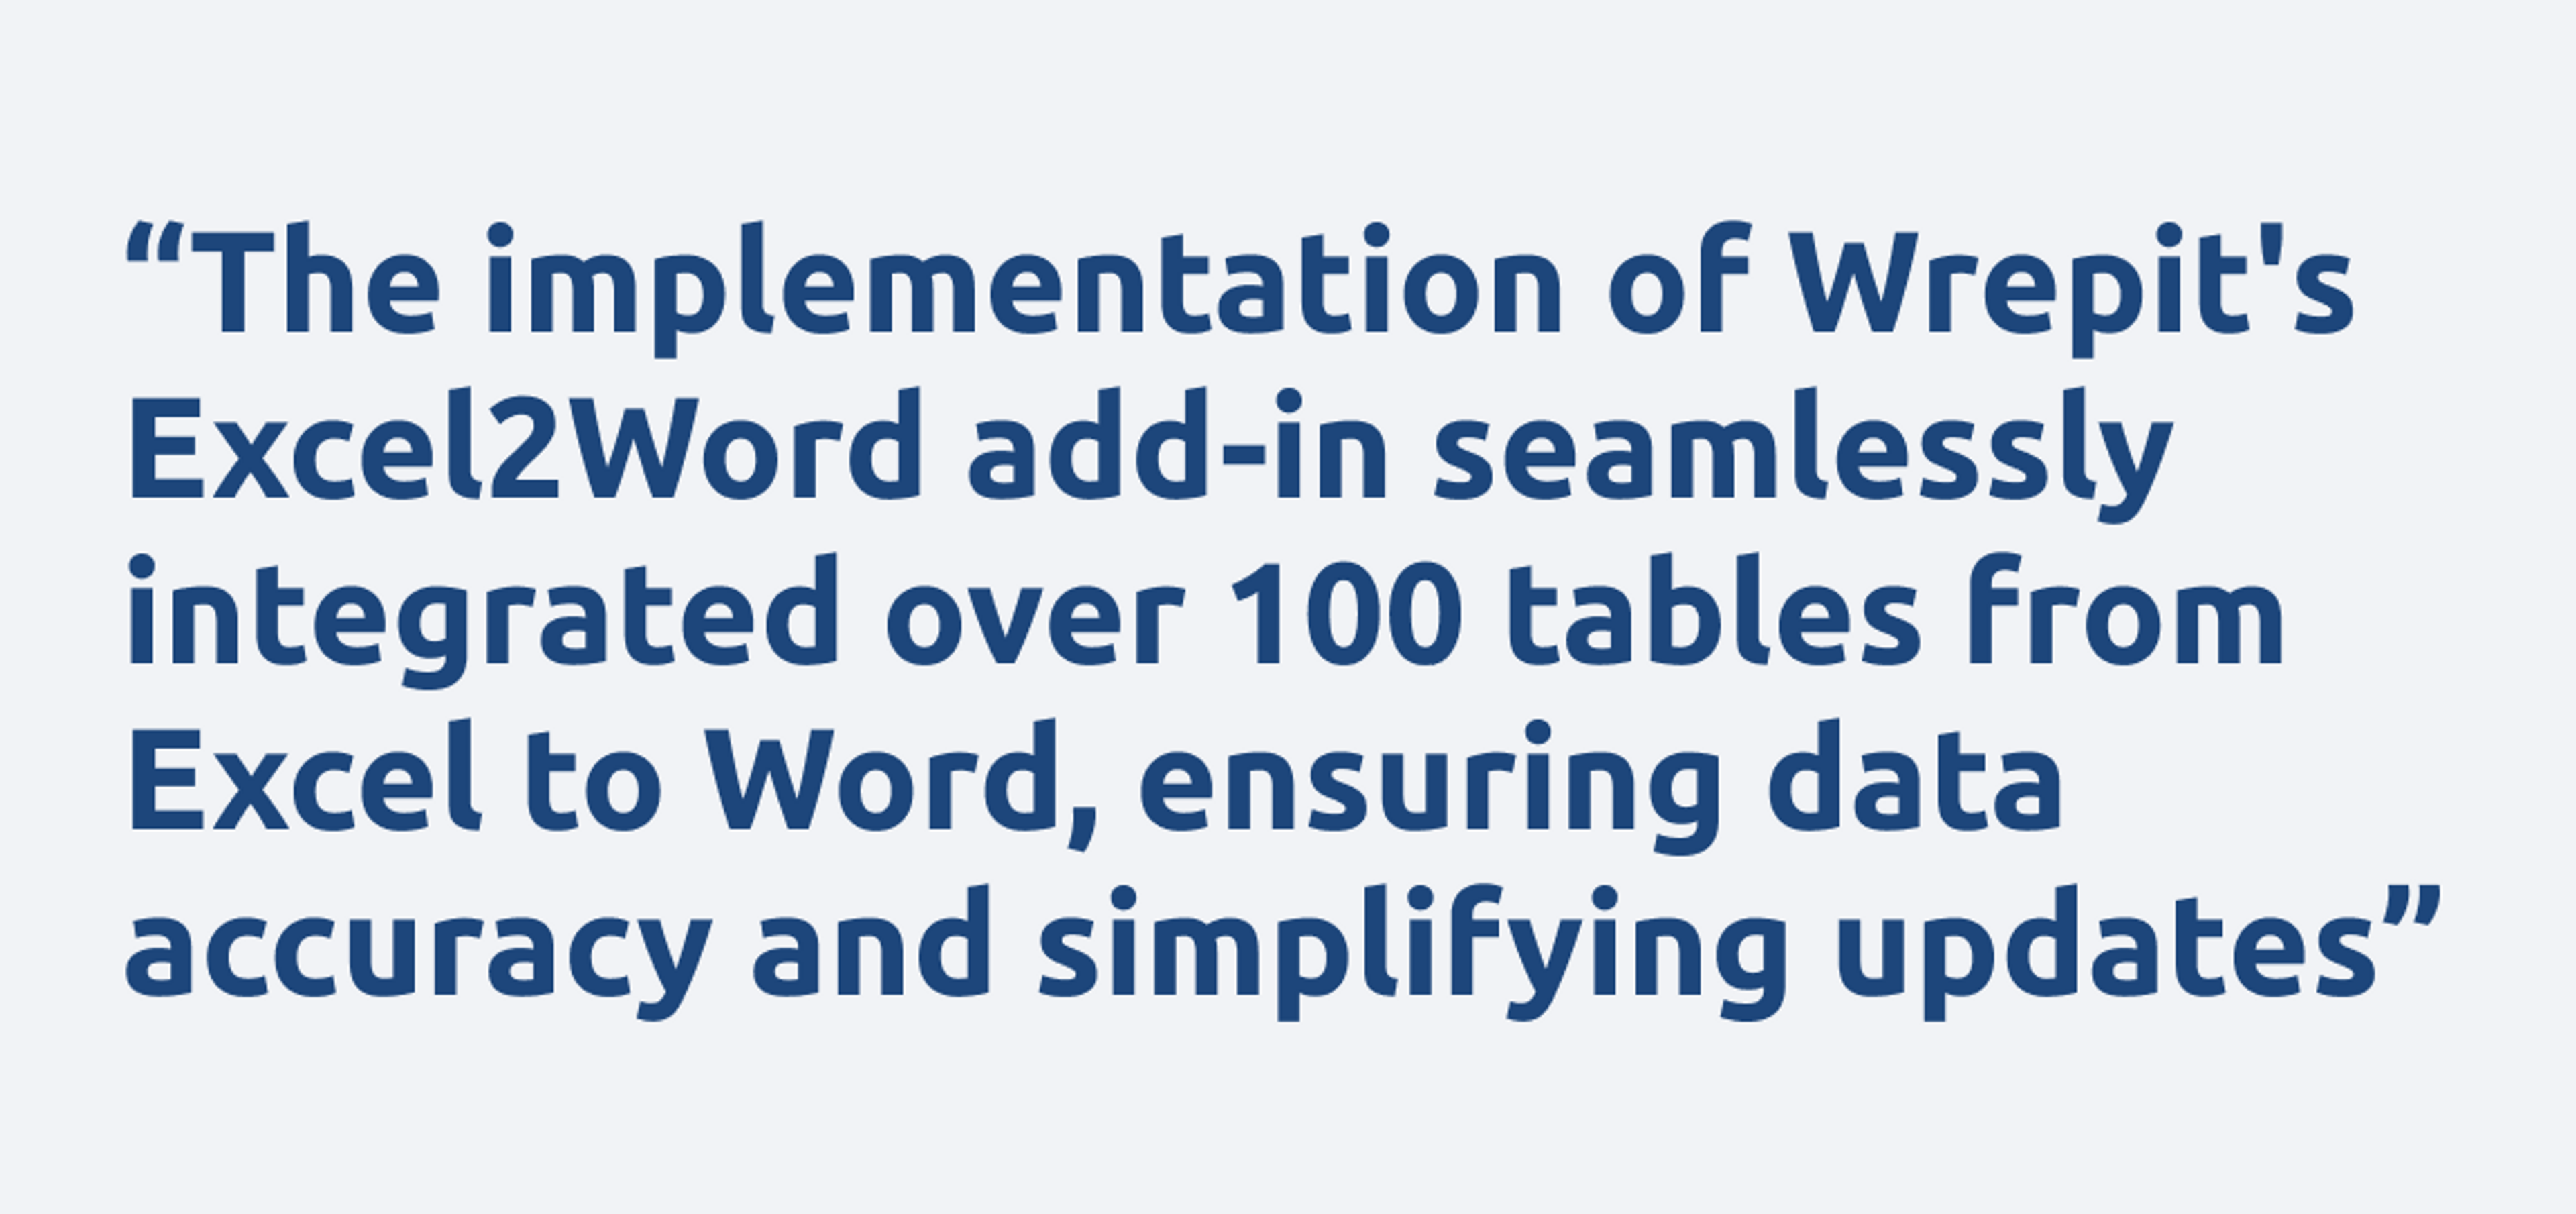 A quote that reads: “The implementation of Wrepit's Excel2Word add-in seamlessly integrated over 100 tables from Excel to Word, ensuring data accuracy and simplifying updates”